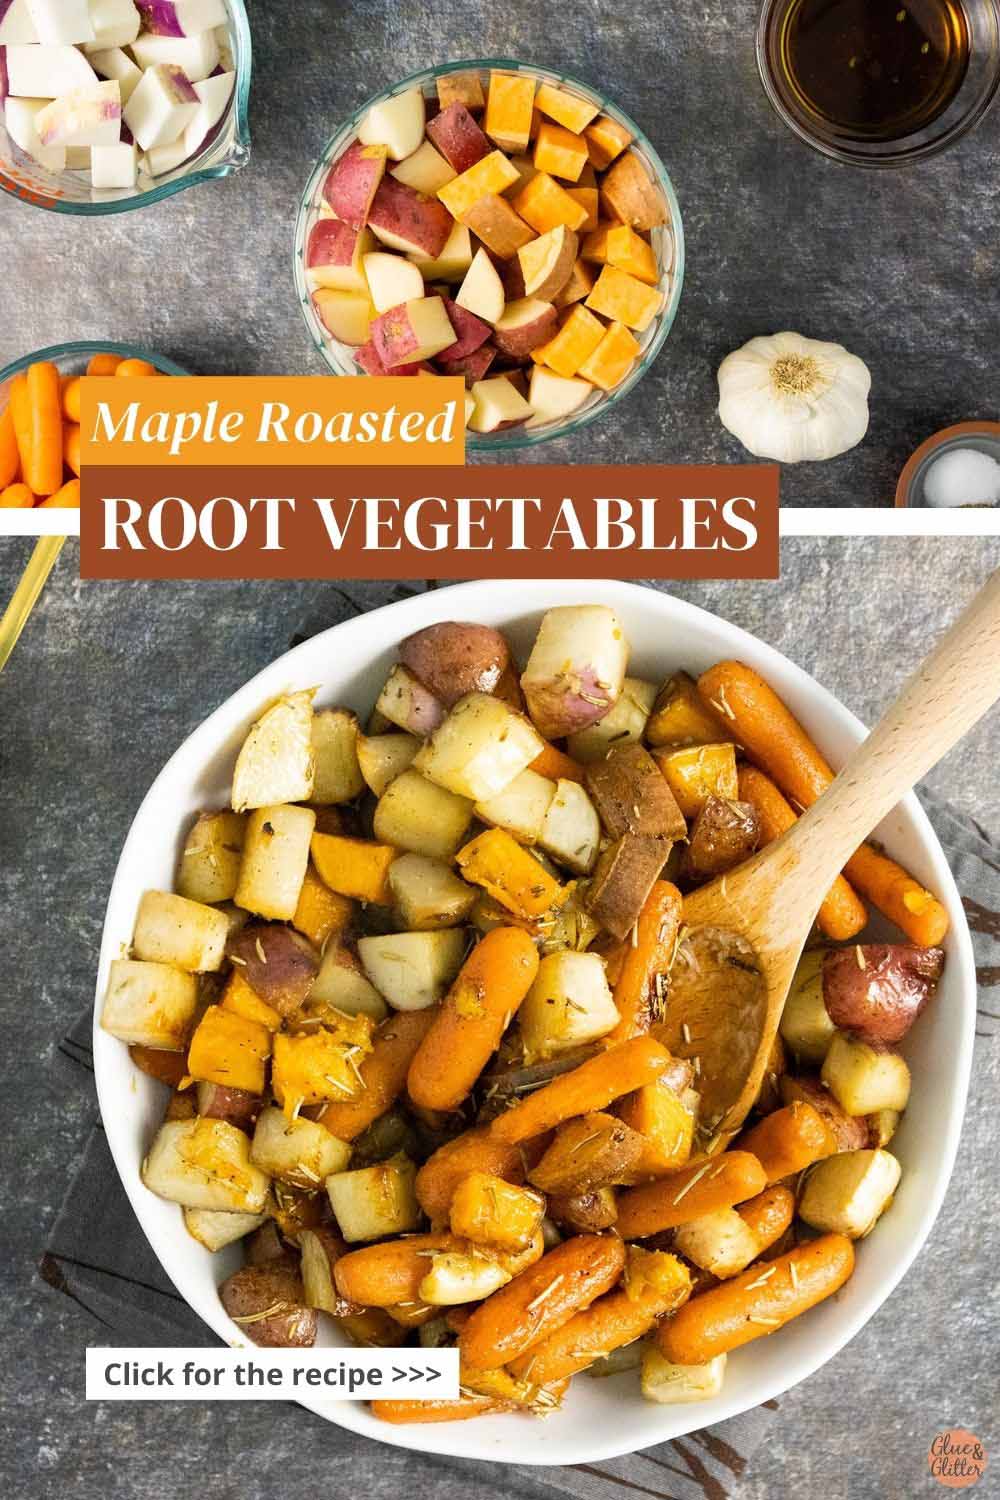 image collage showing bowls of vegetables and a white serving bowl of maple roasted root vegetables with a wooden serving spoon